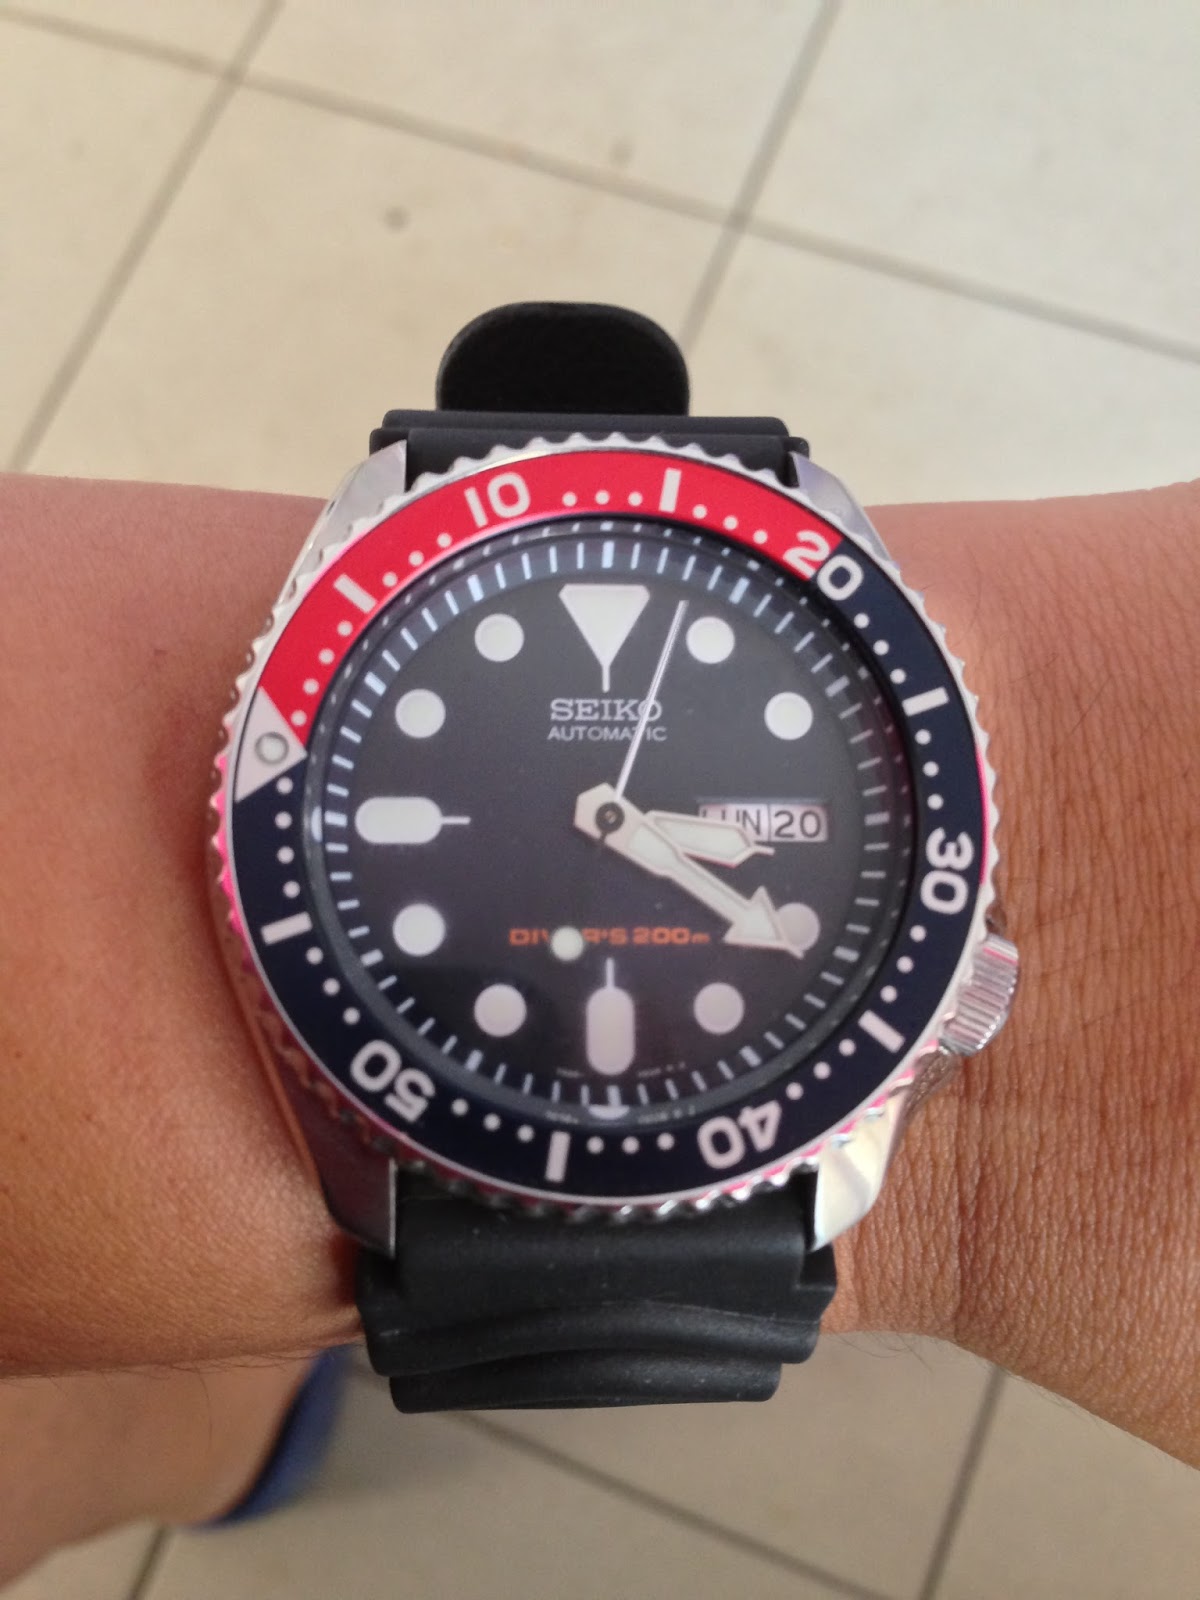 My Eastern Collection: Seiko SKX009K1 Automatic Professional Diver 200M - A Good Cheap Watch, Review